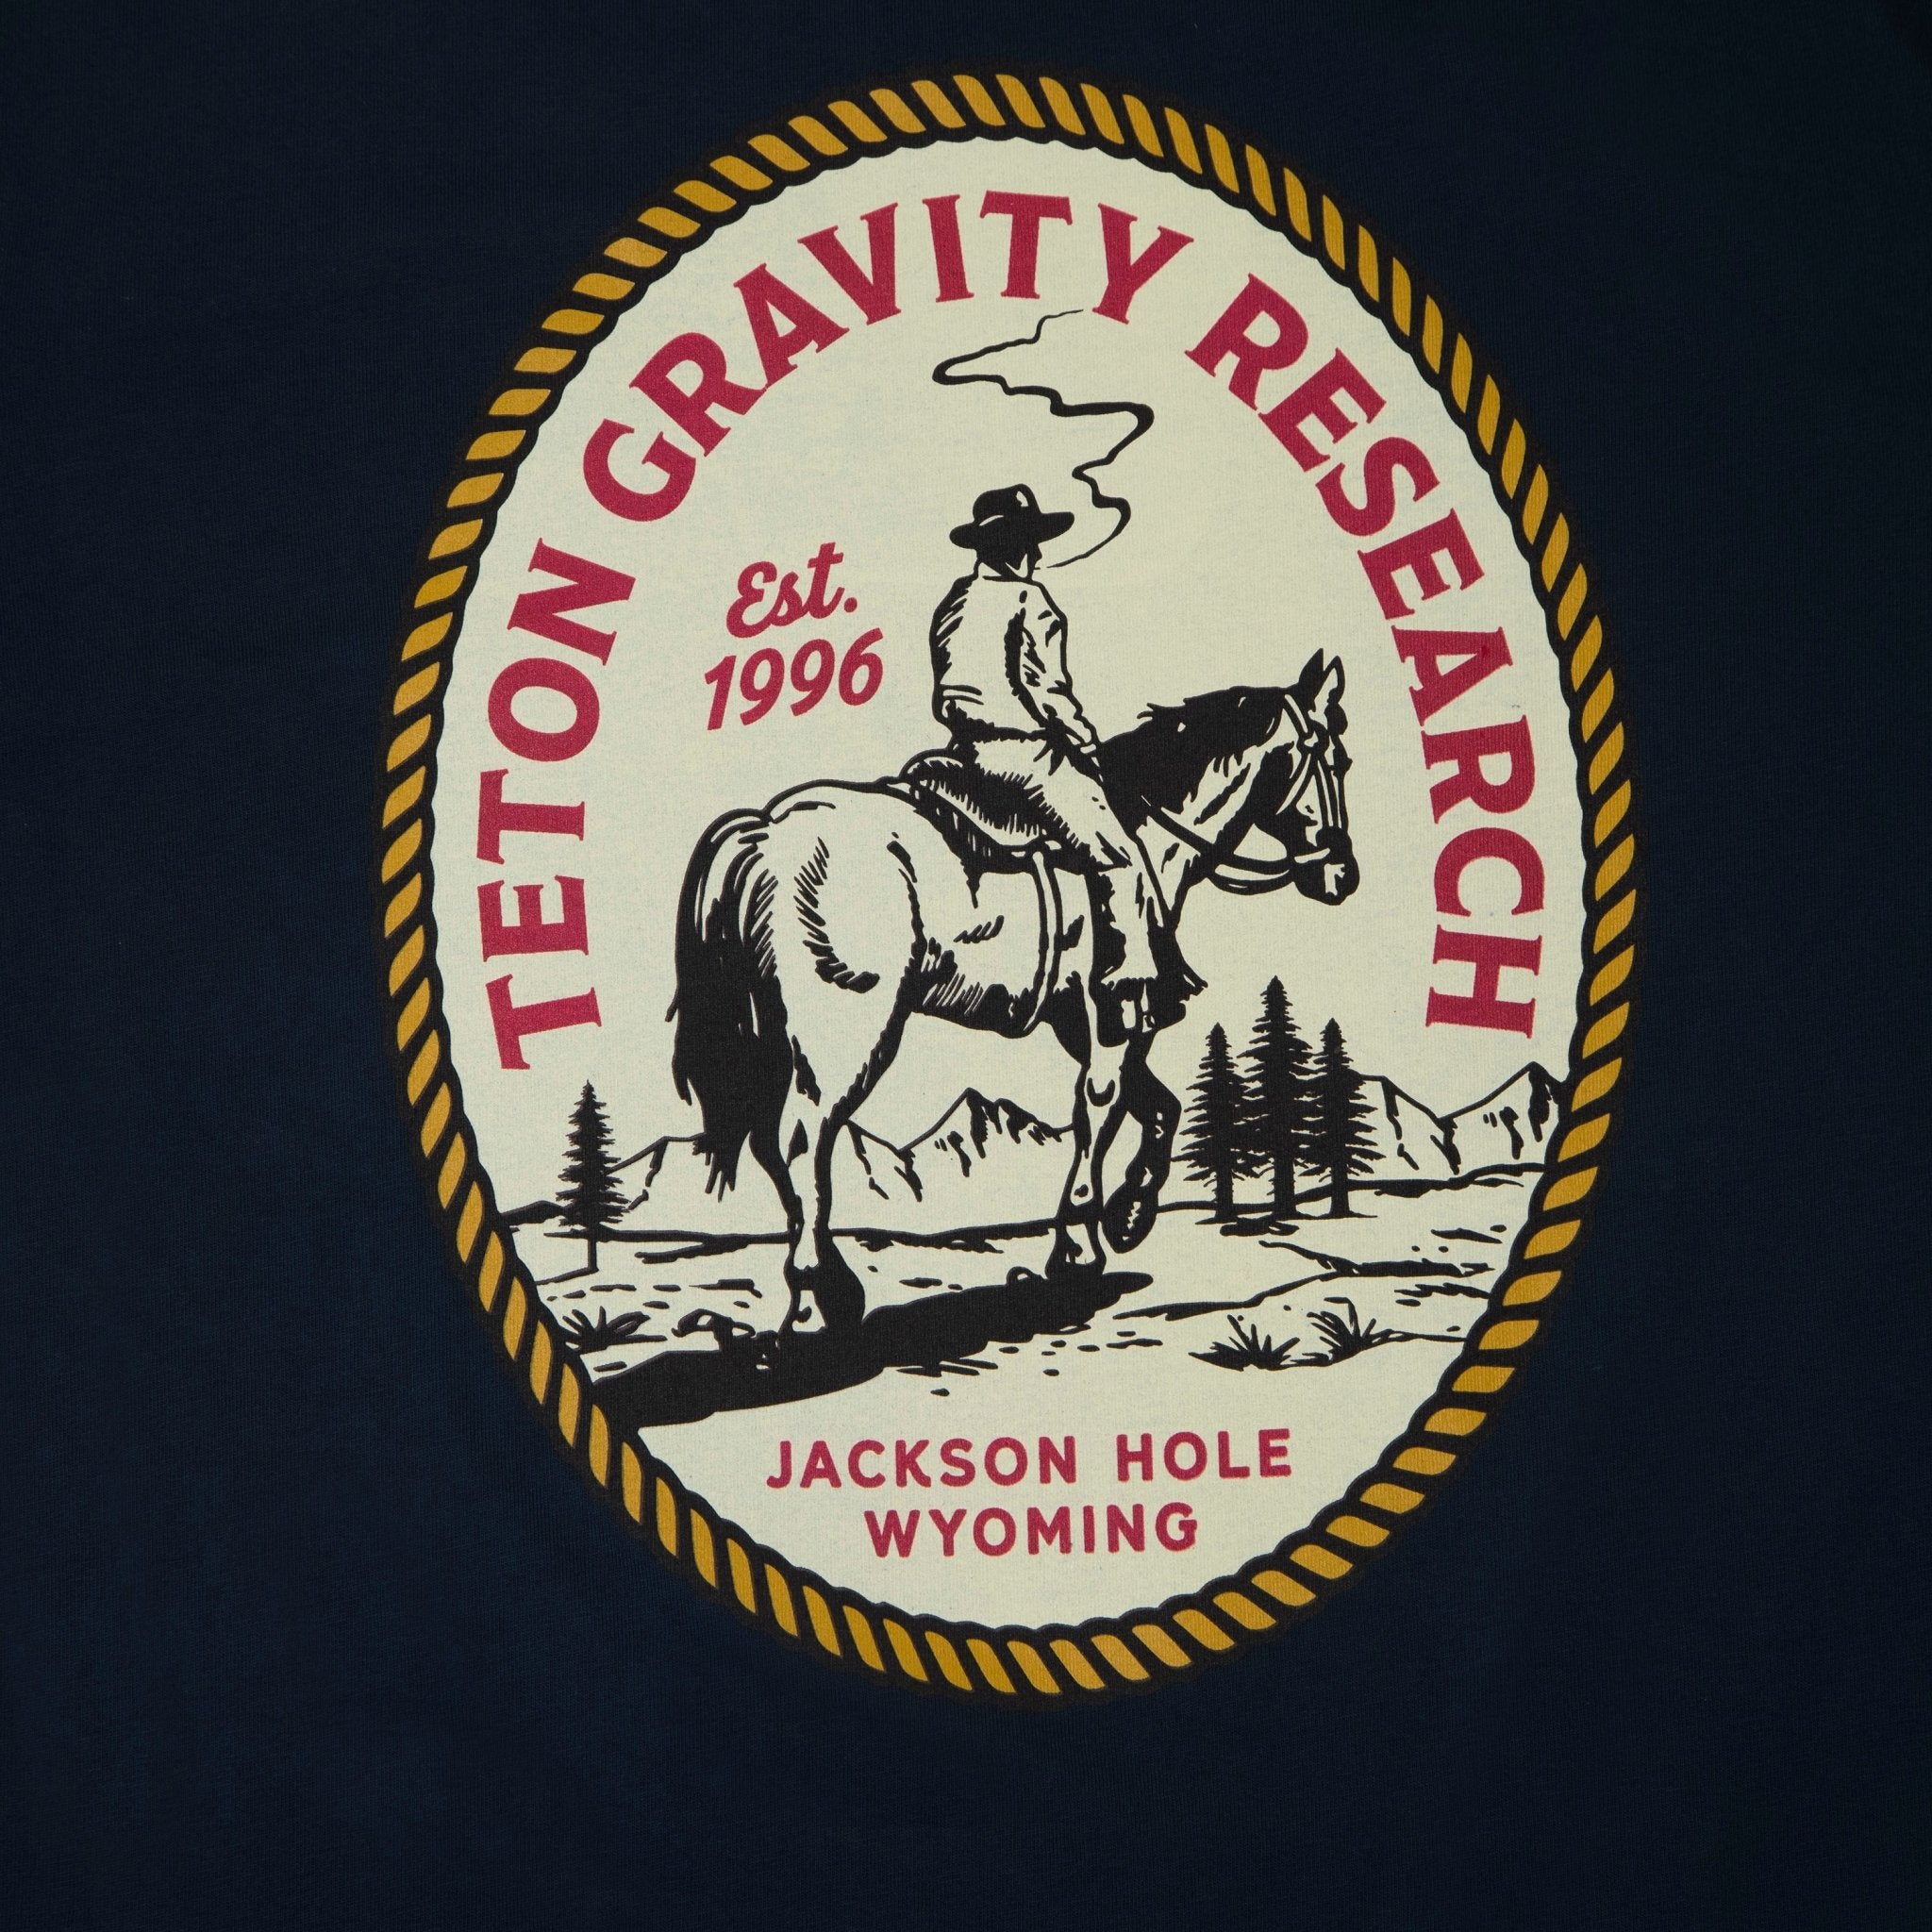 black t-shirt with lonesome cowboy graphic on back of t-shirt. Graphic shows a cowboy on a horse with est. 1996, Jackson hole Wyoming letter on it.